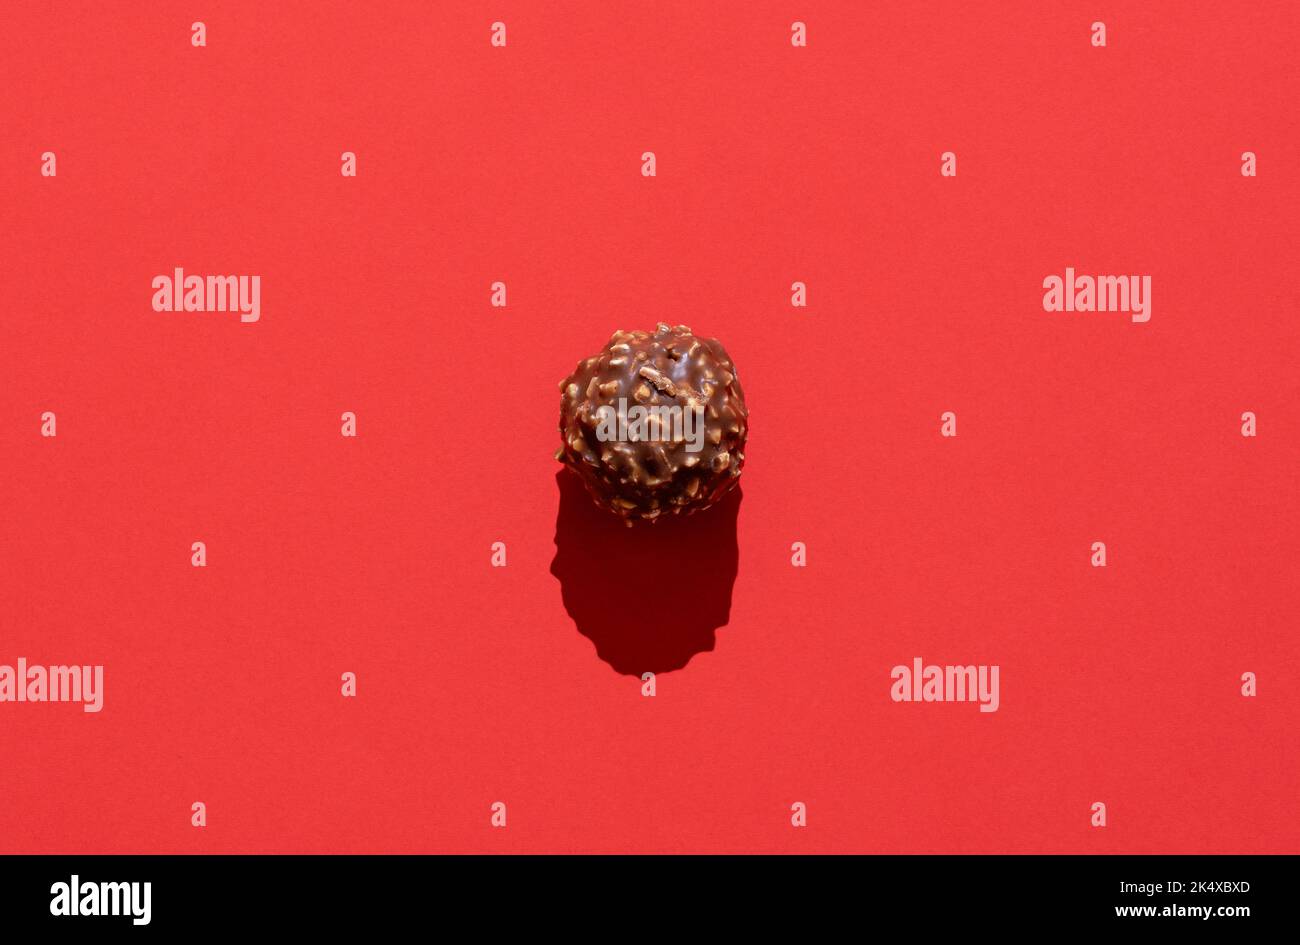 Directly above view with one chocolate candy on a red background. Delicious hazelnut and chocolate truffle isolated on a colorful table. Stock Photo